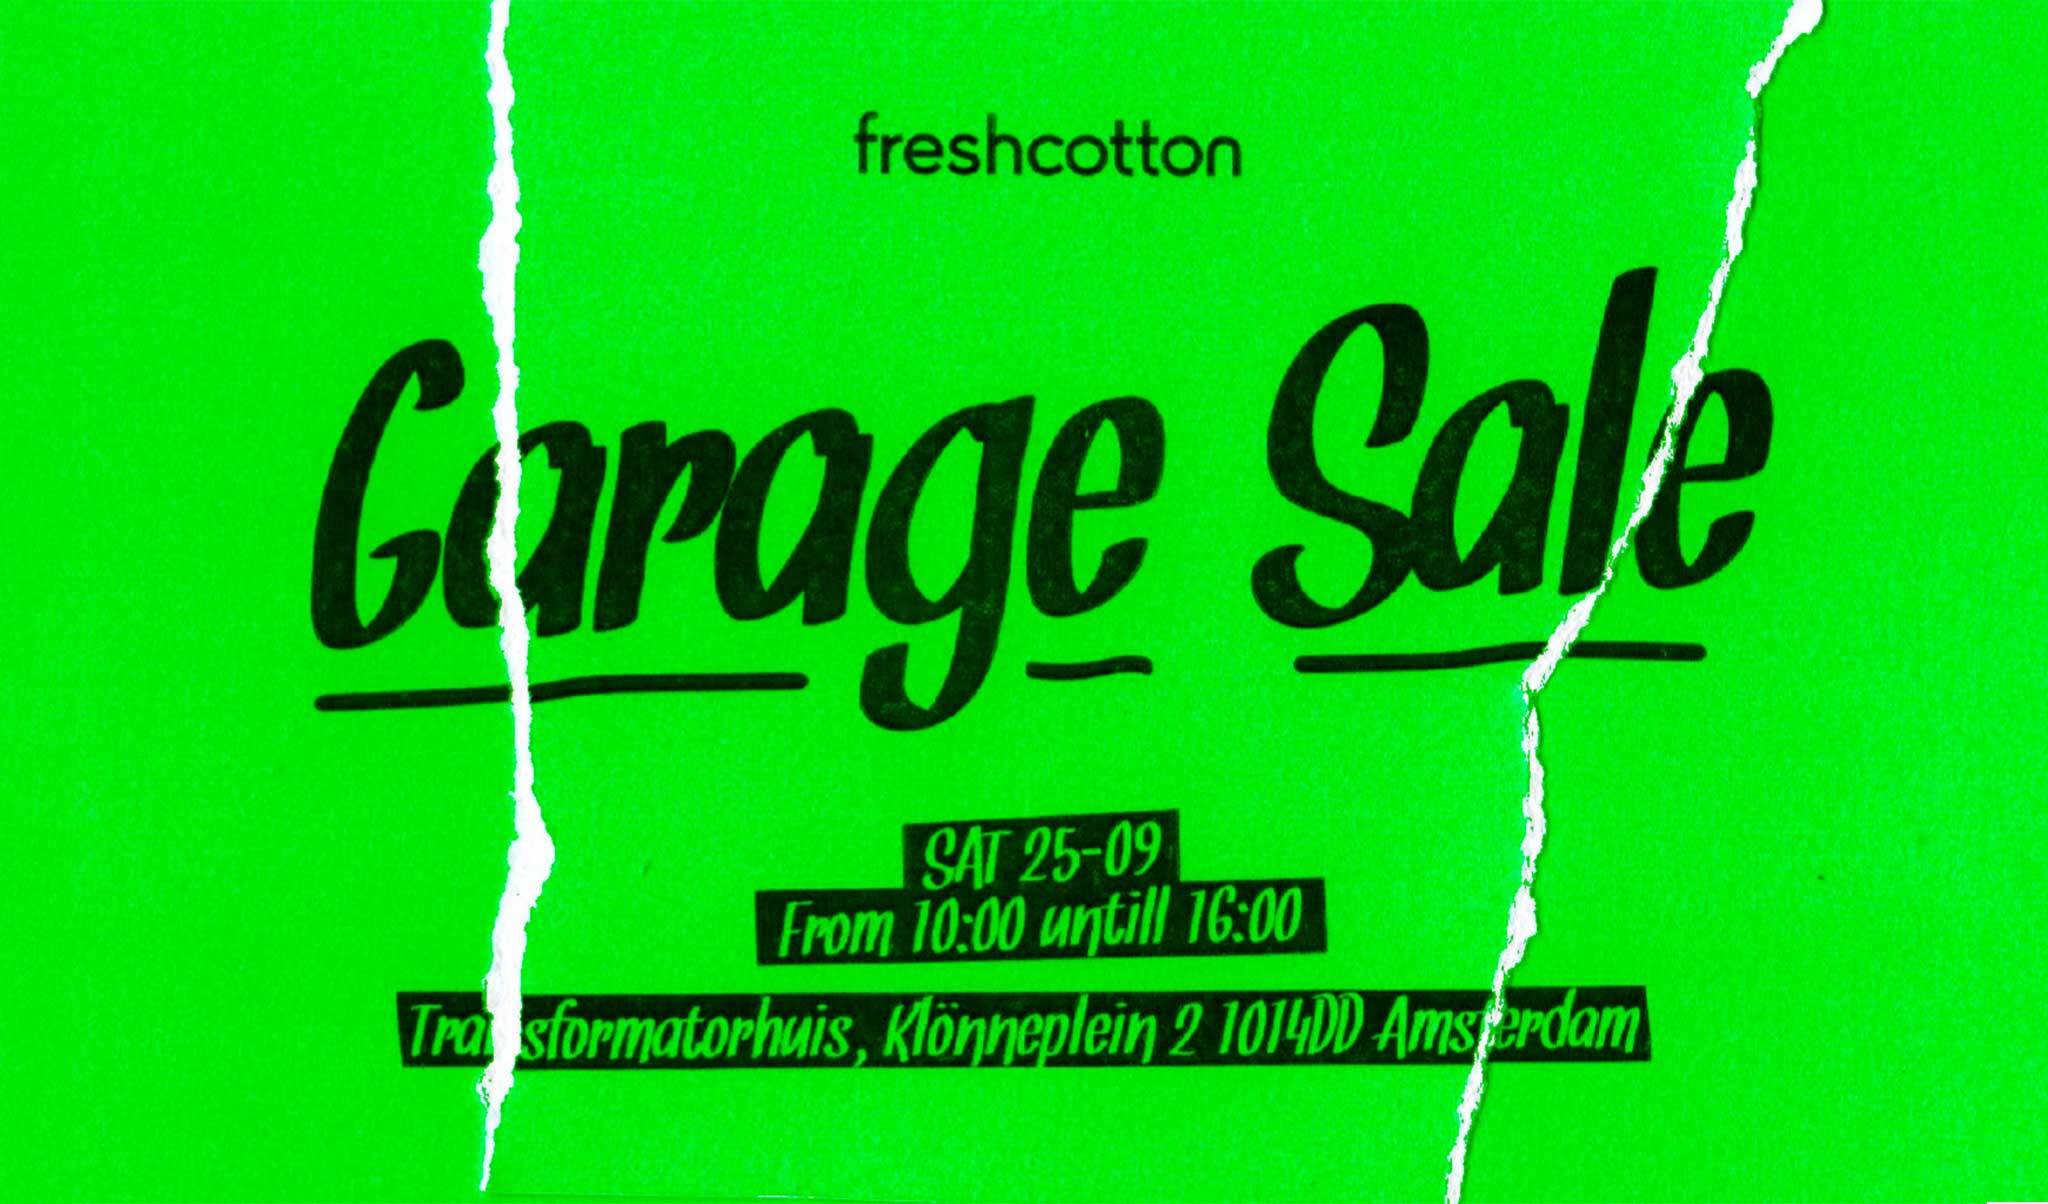 GARAGE SALE '21. Are you ready? 